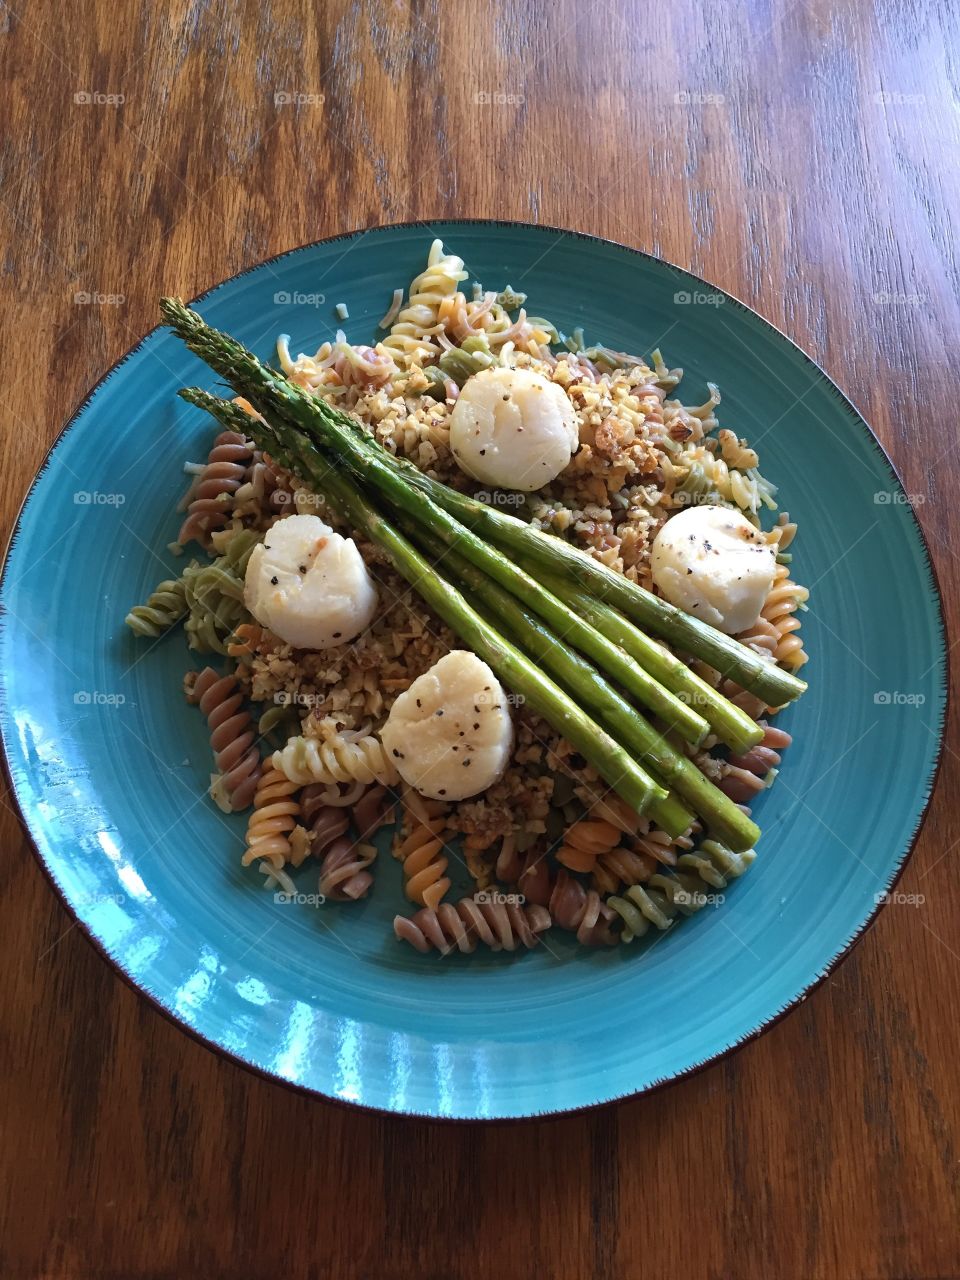 Rotini pasta with asparagus and scallops